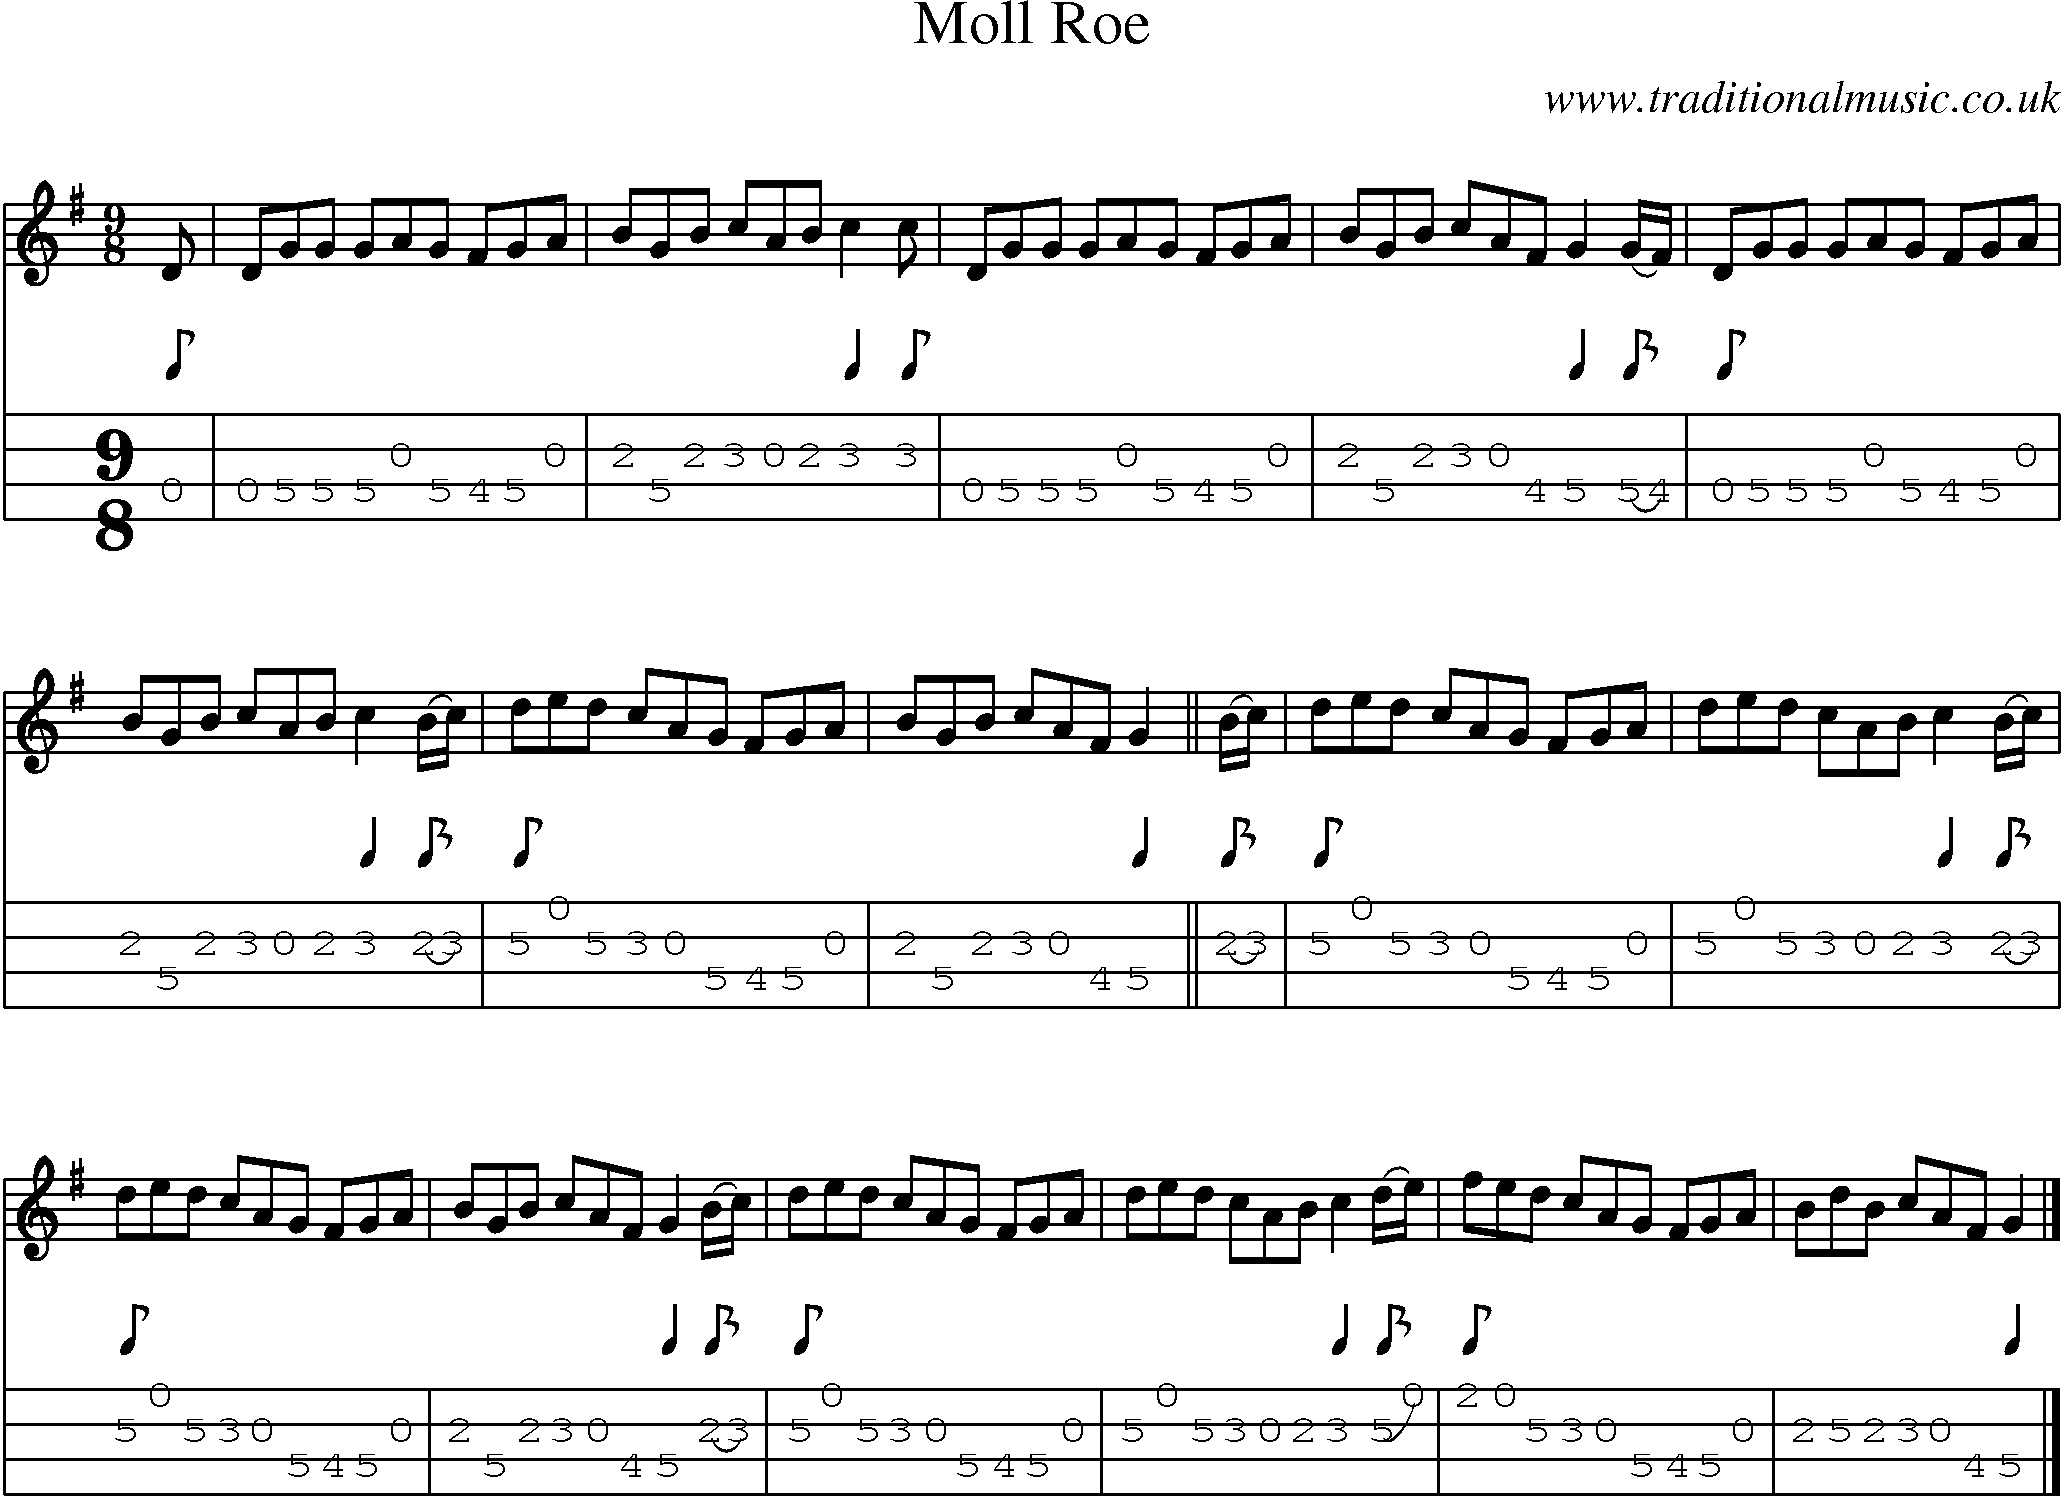 Music Score and Mandolin Tabs for Moll Roe